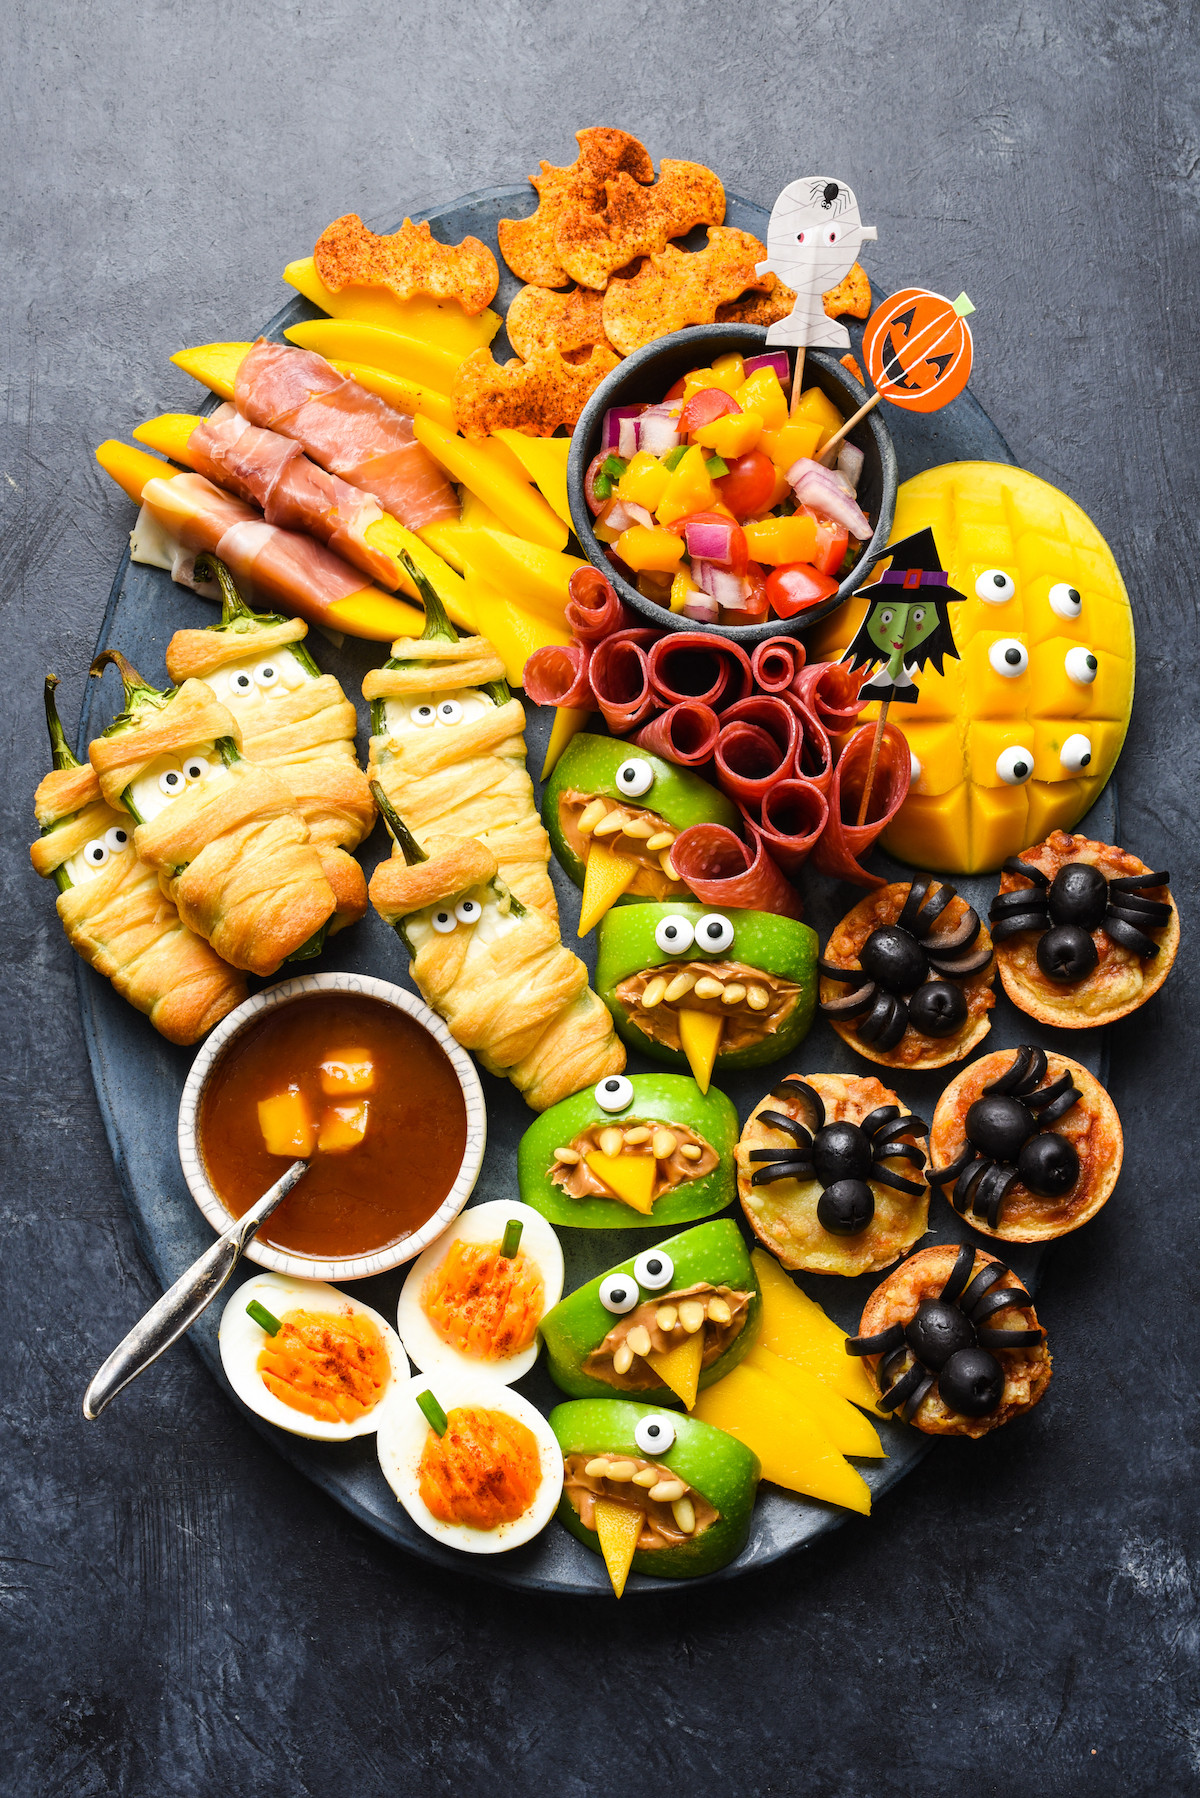 Small Halloween Party Ideas
 Easy Halloween Party Food